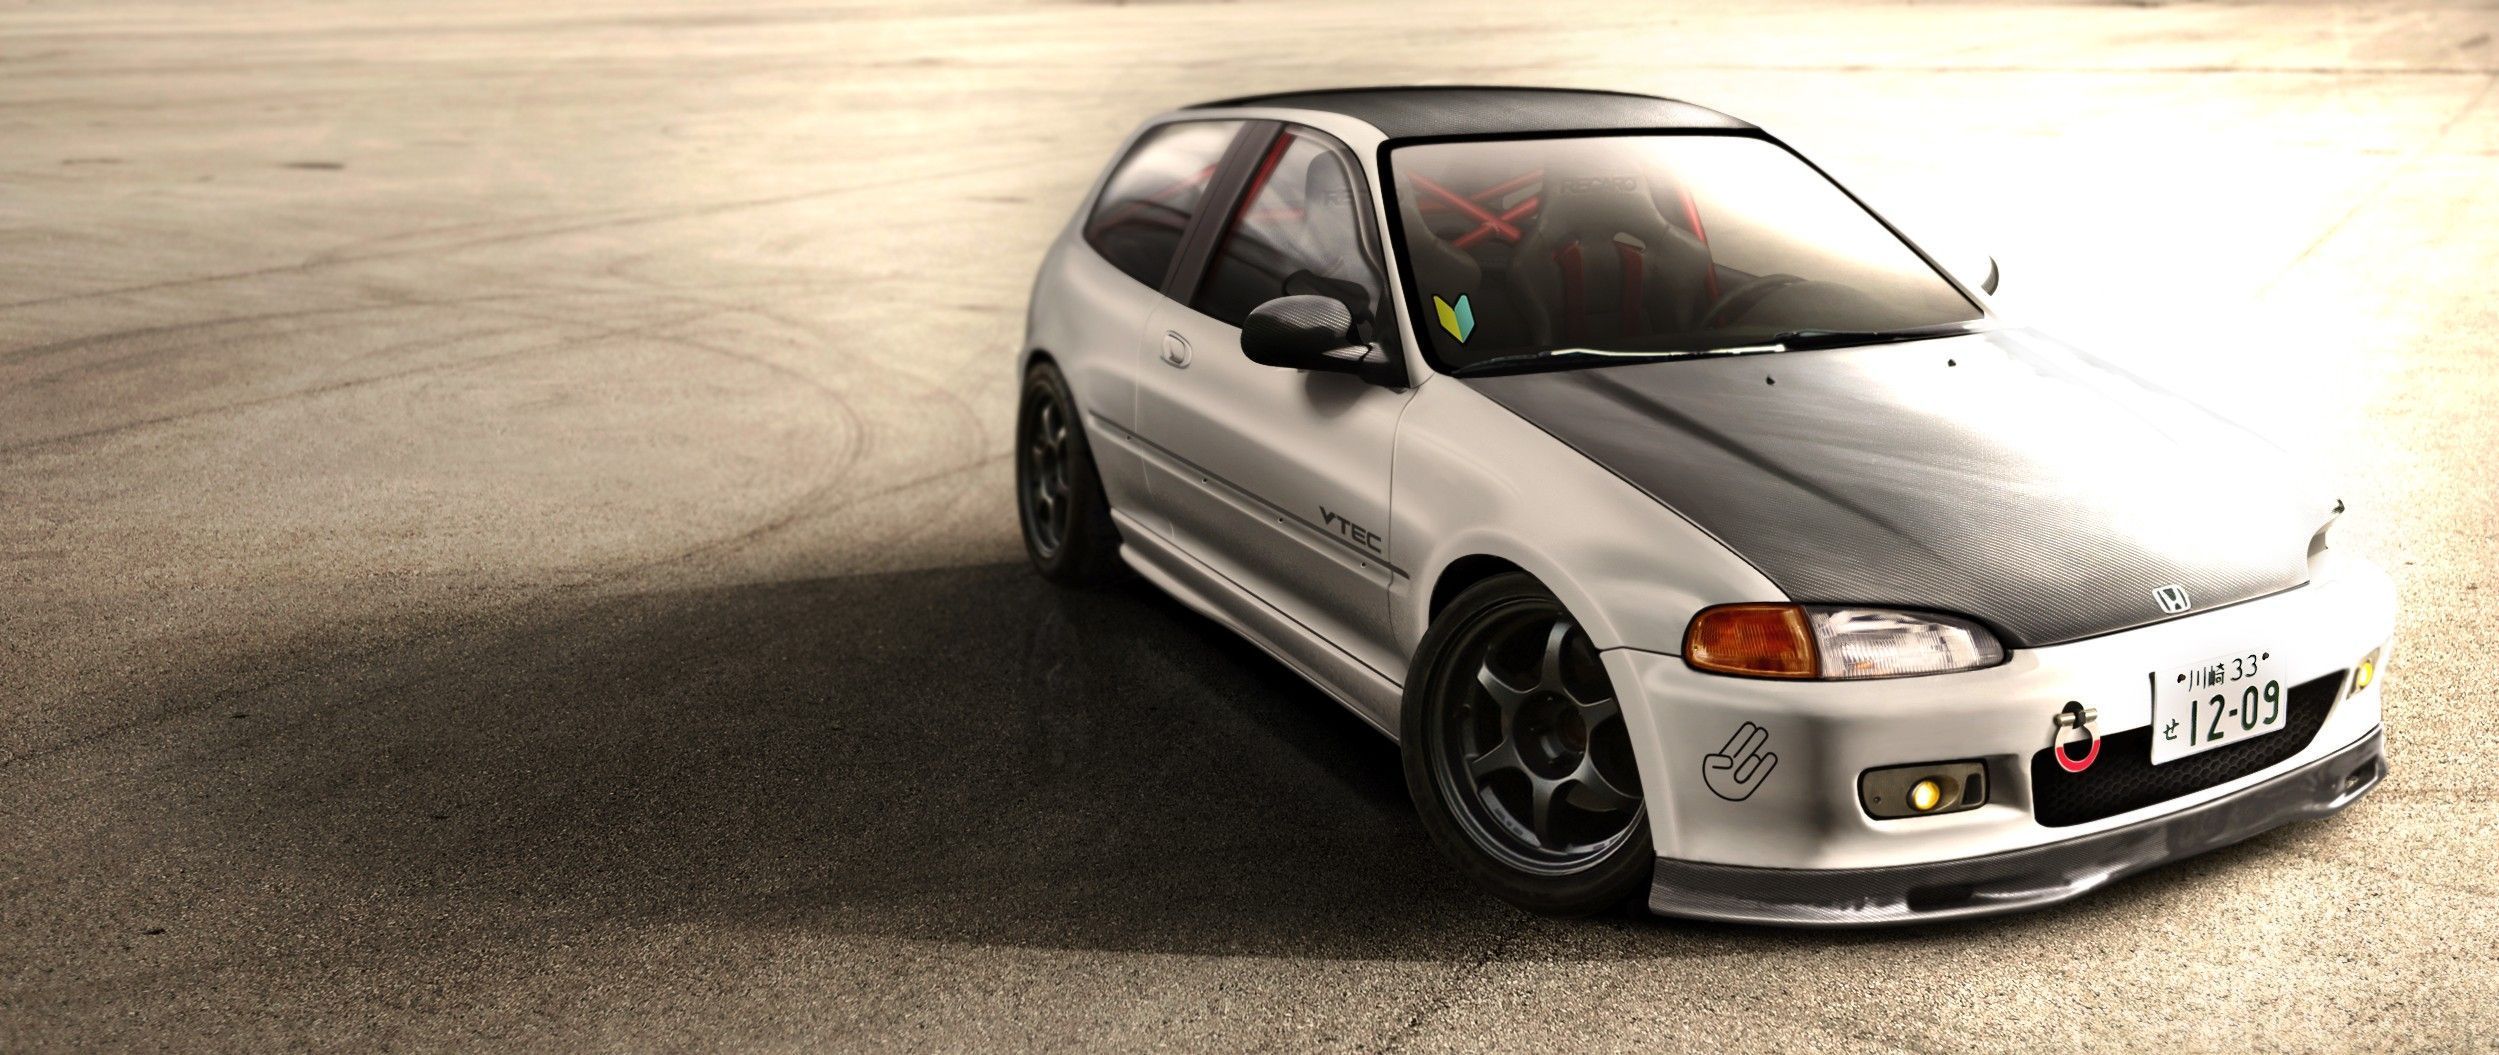 Jdm Wallpapers Group 91